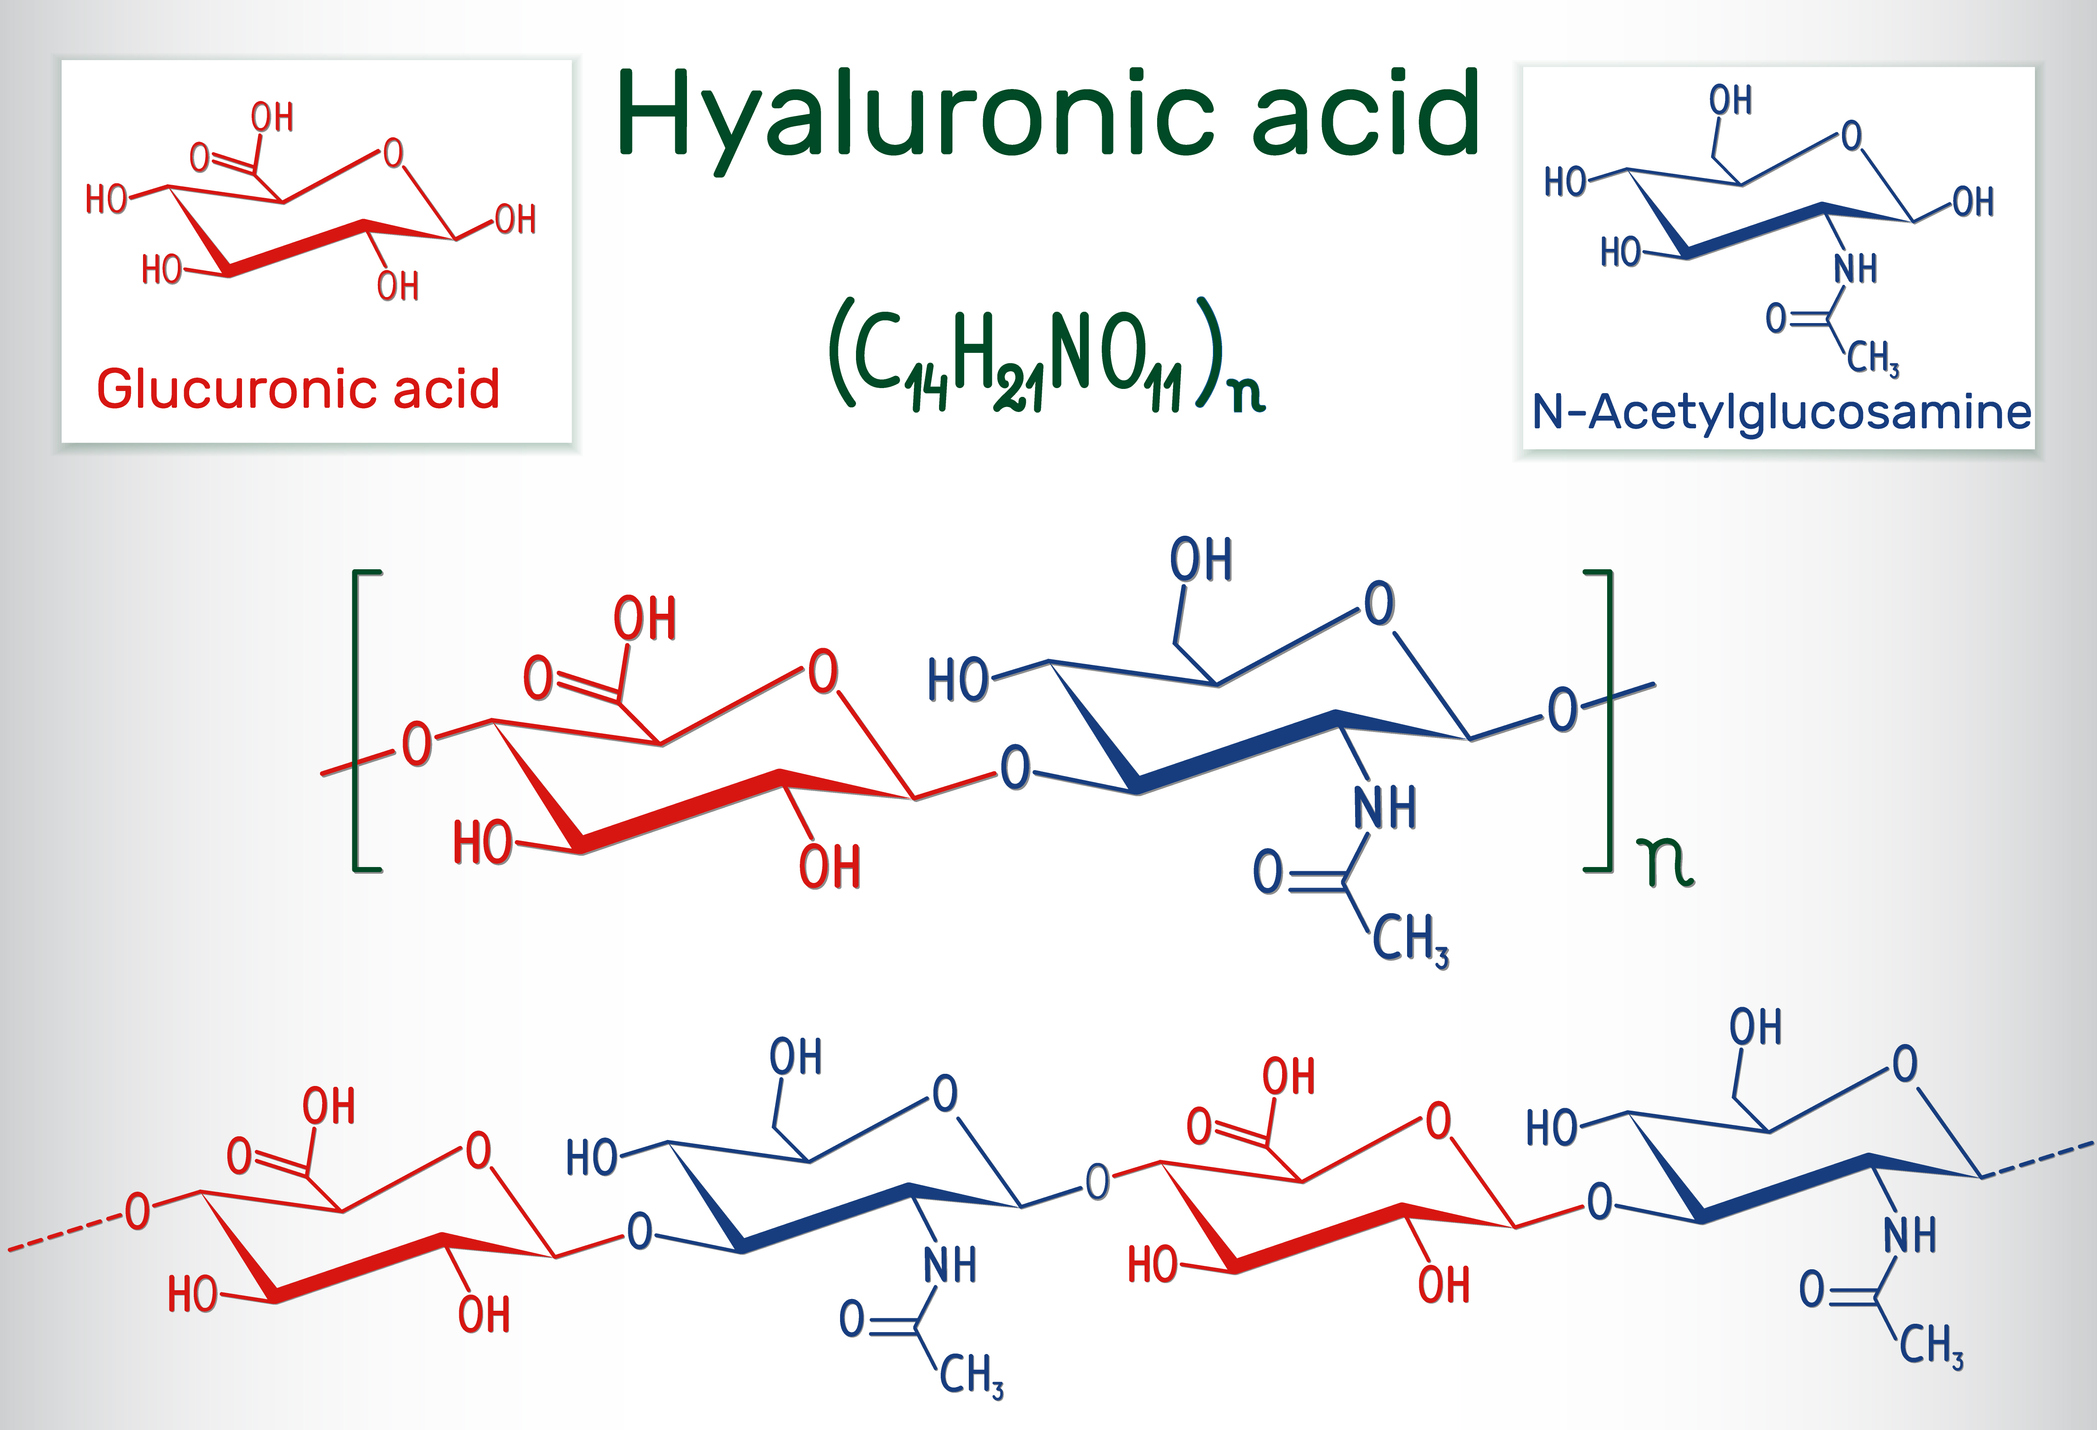 Composition of hyaluronic acid